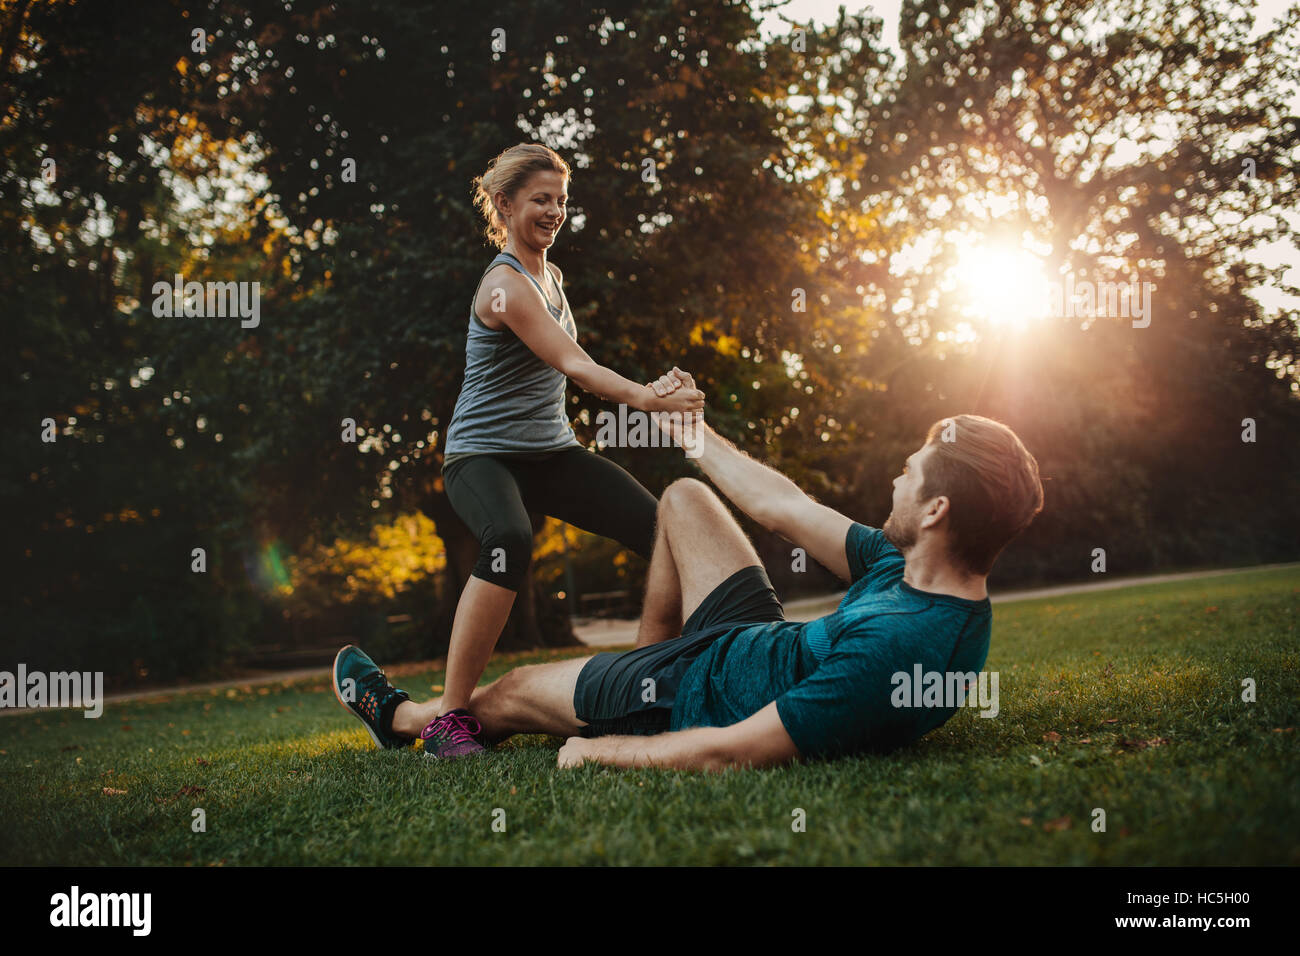 Shot of young woman helping man to get up from ground. Healthy young couple at park exercising together. Stock Photo